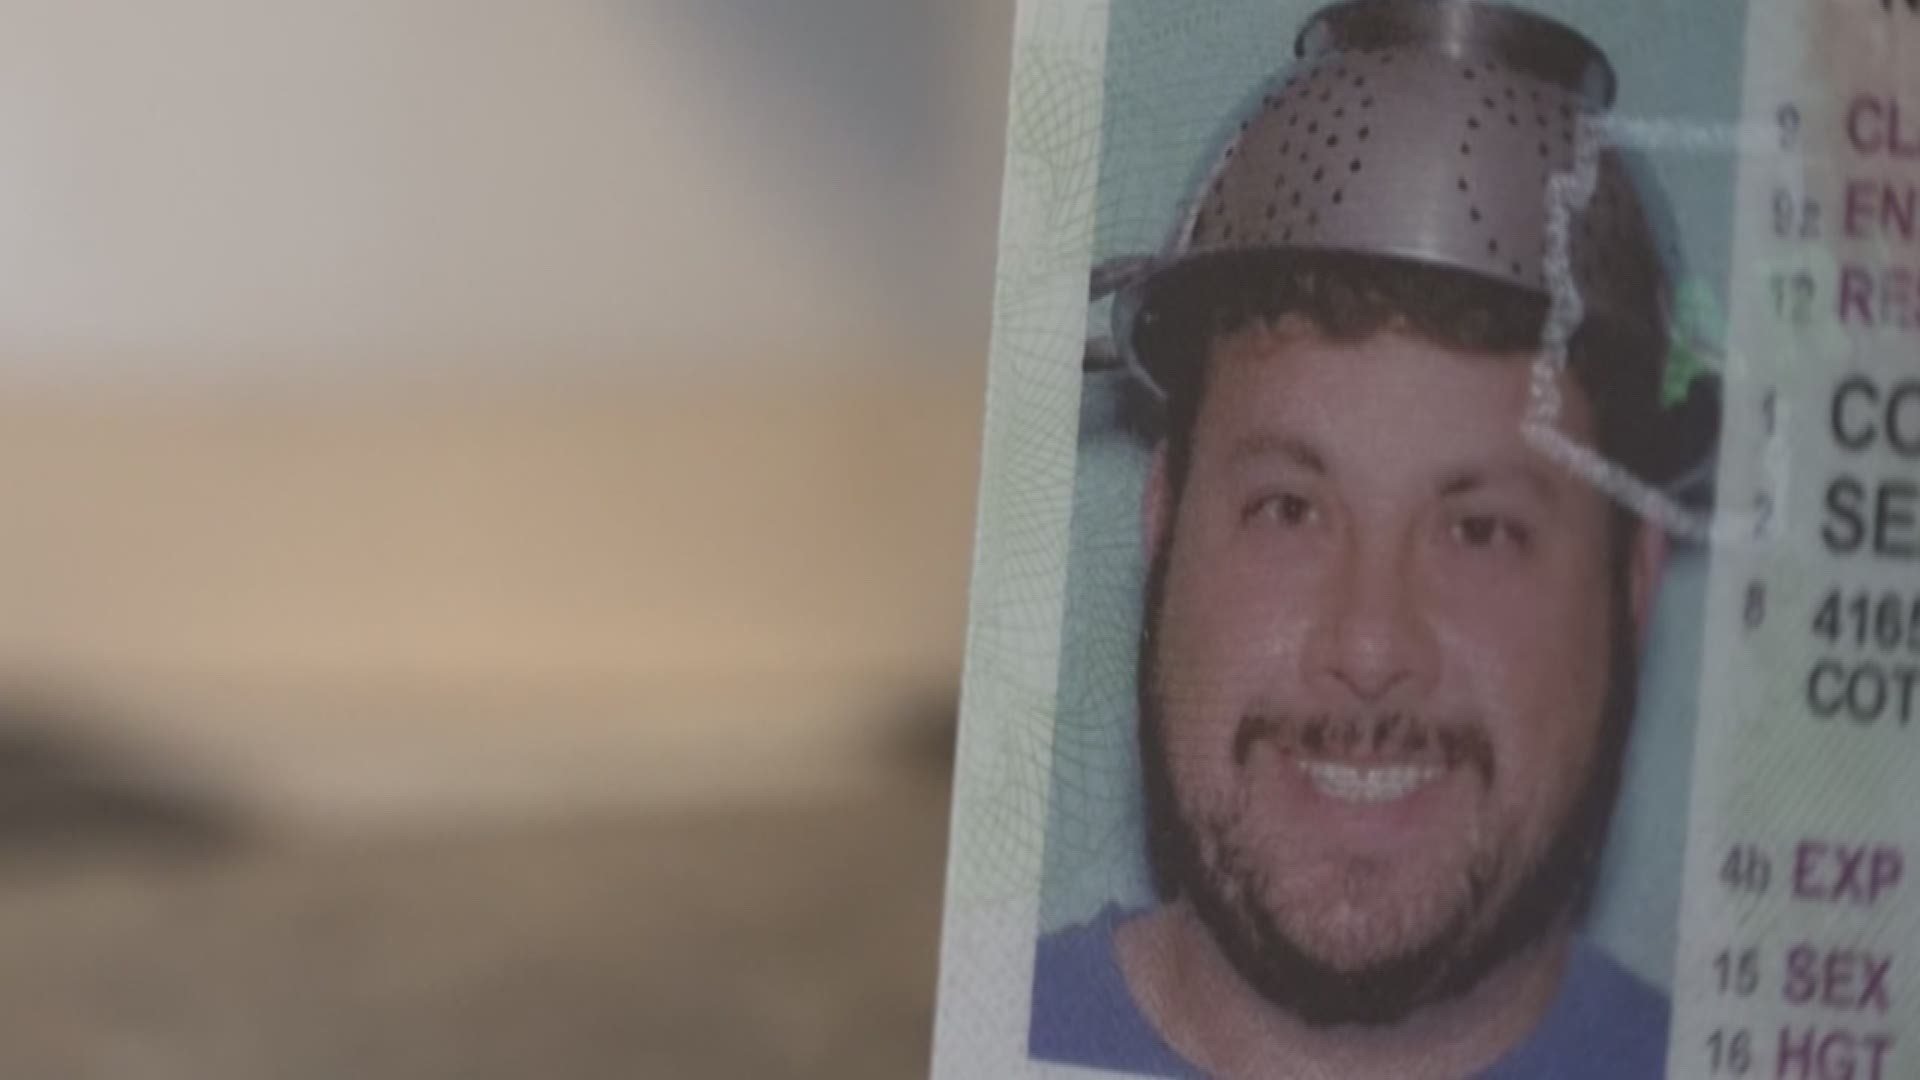 A Phoenix man says the colander he wore on his head for his ID photo is part of his religion, pastafarianism.